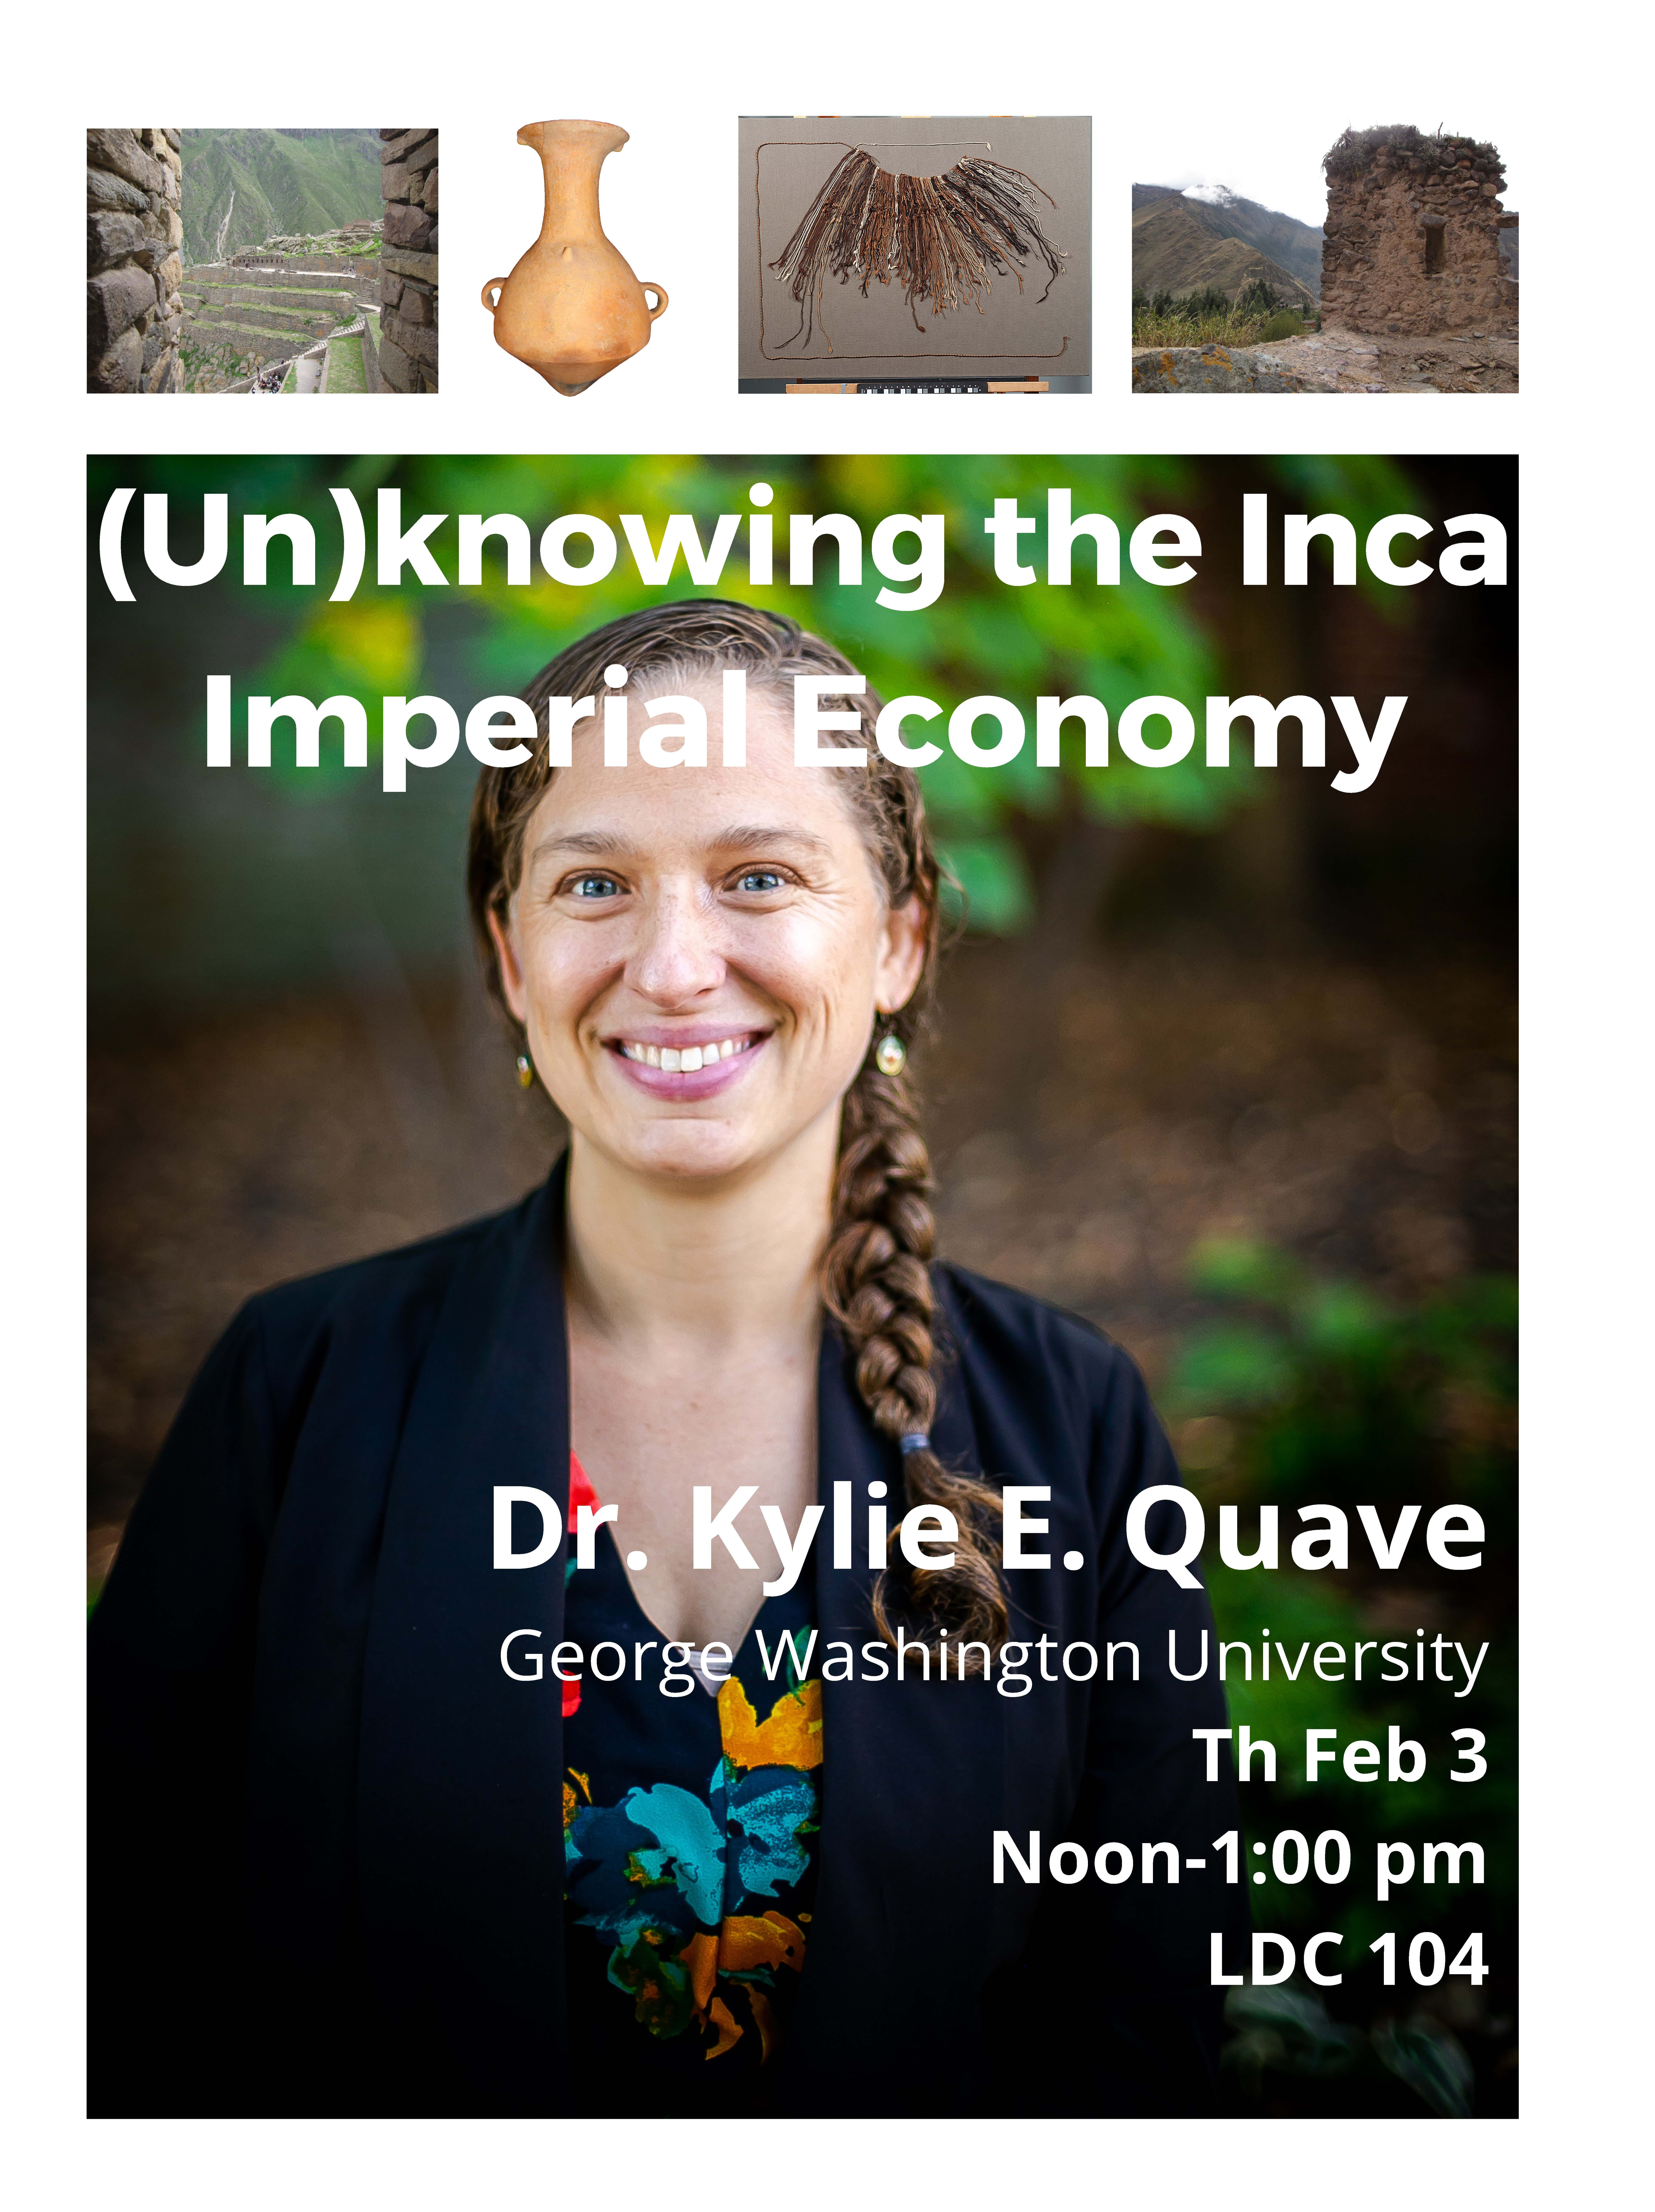 Poster for Dr Quave talk on the Inca Imperial Economy